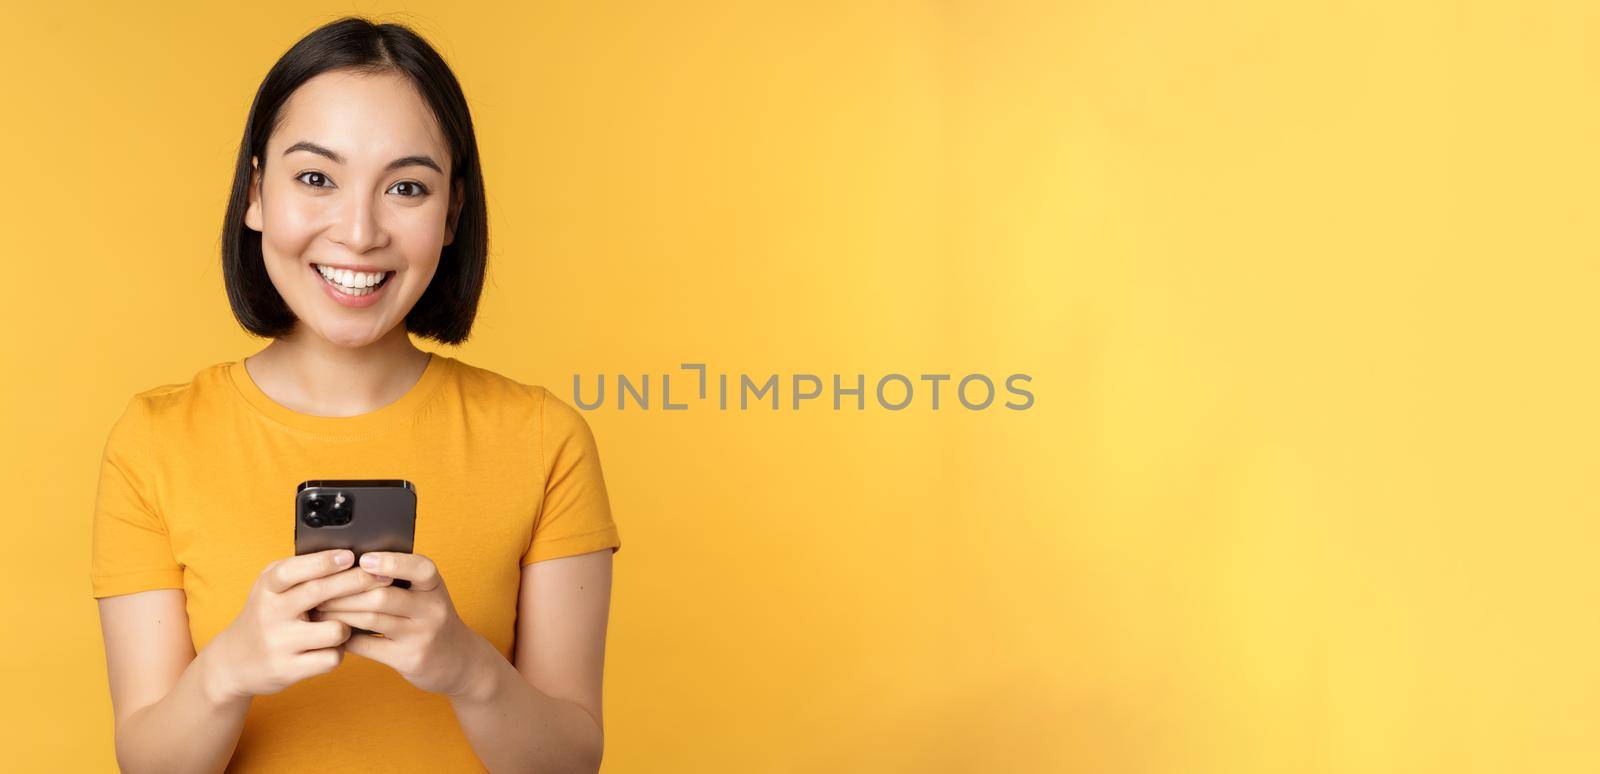 Technology. Smiling asian woman using mobile phone, holding smartphone in hands, standing in t-shirt against yellow background.